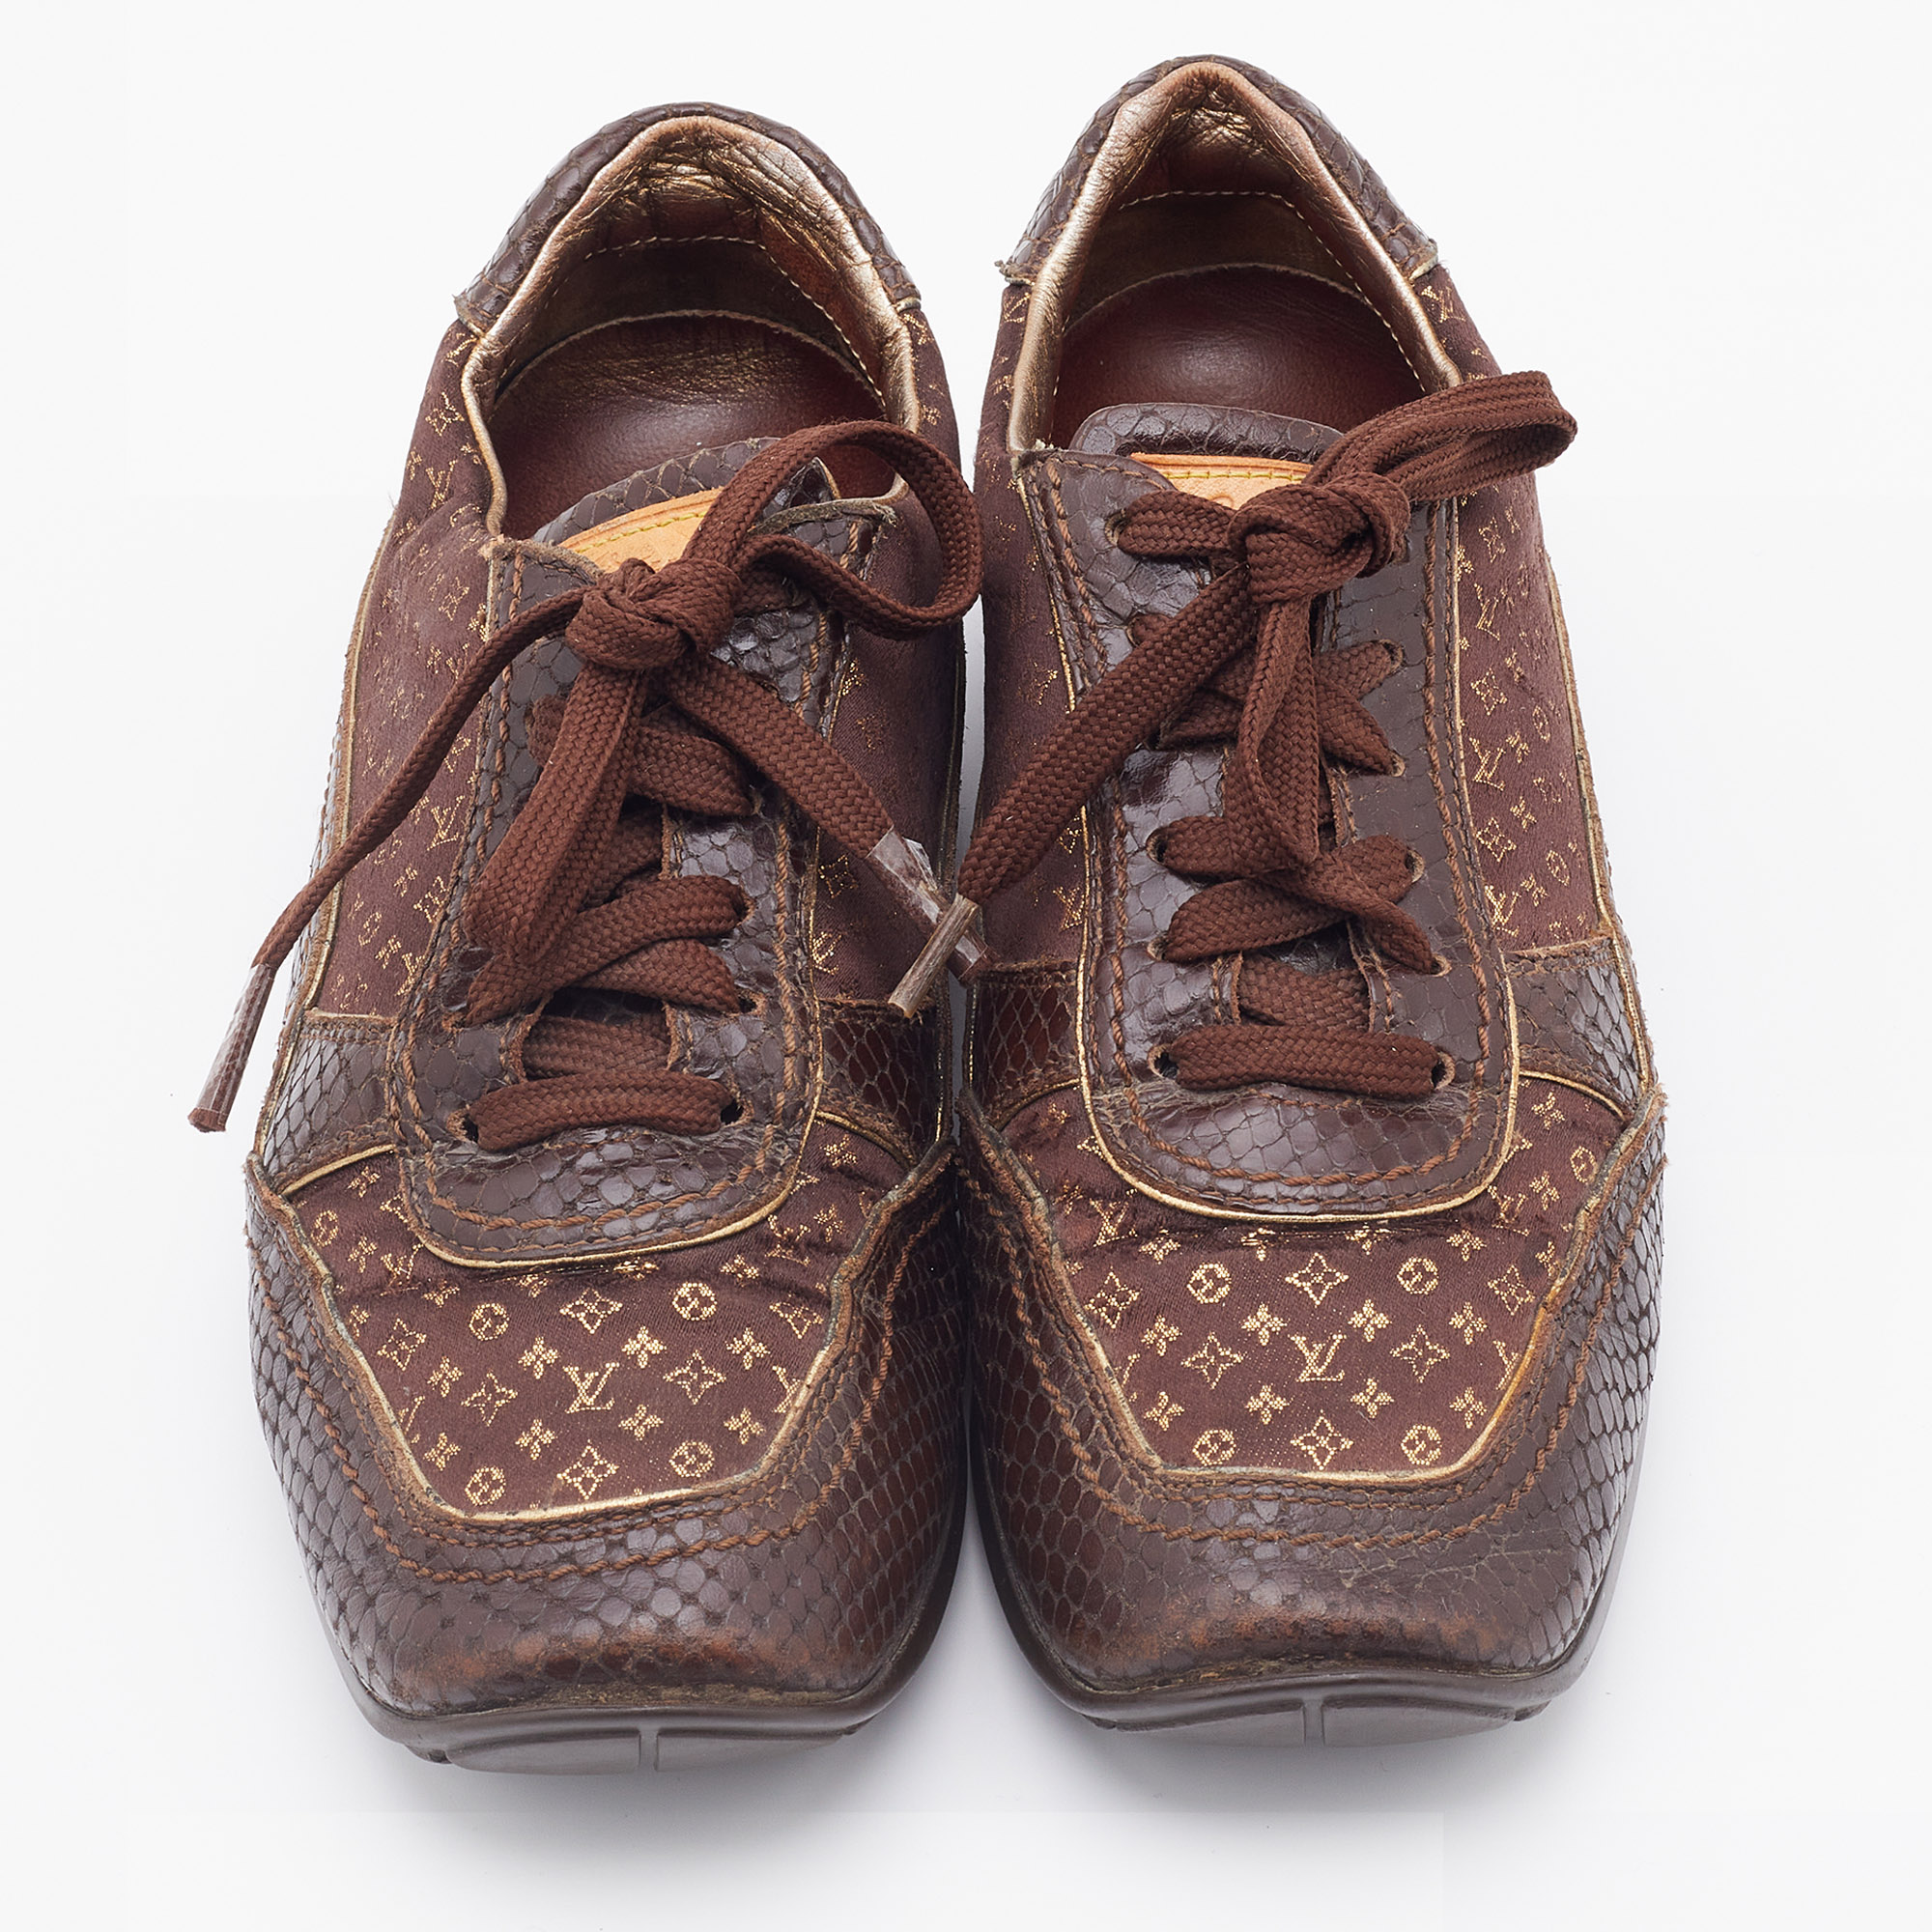 Louis Vuitton Monogram Fabric And Python Embossed Leather Low Top Sneakers Size 37